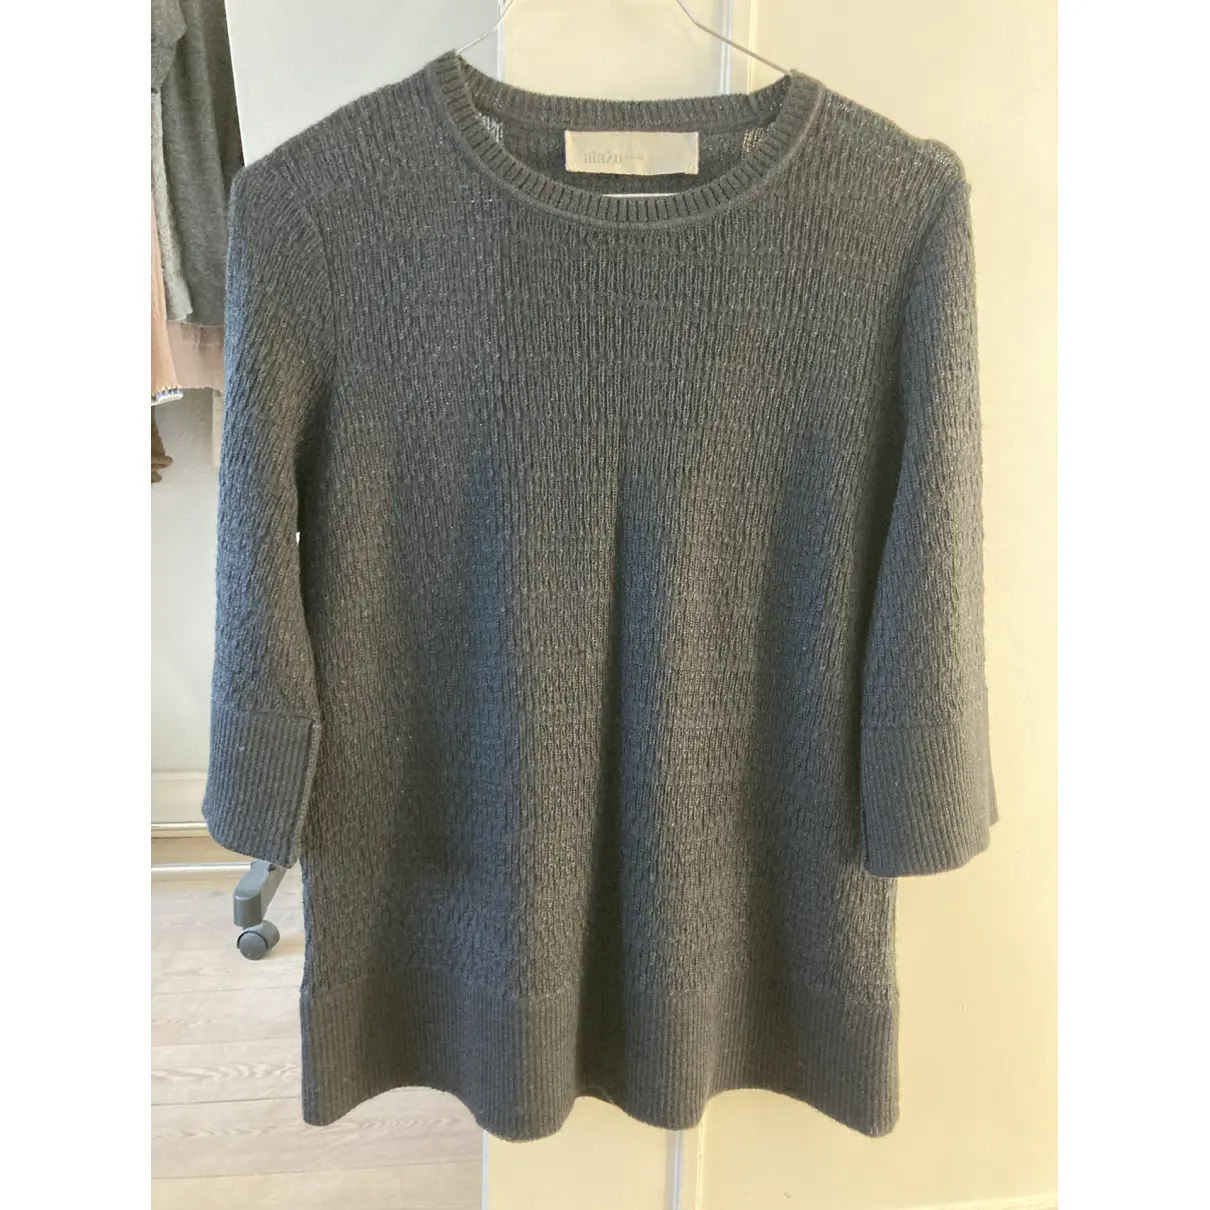 Buy Aiayu Cashmere jumper online